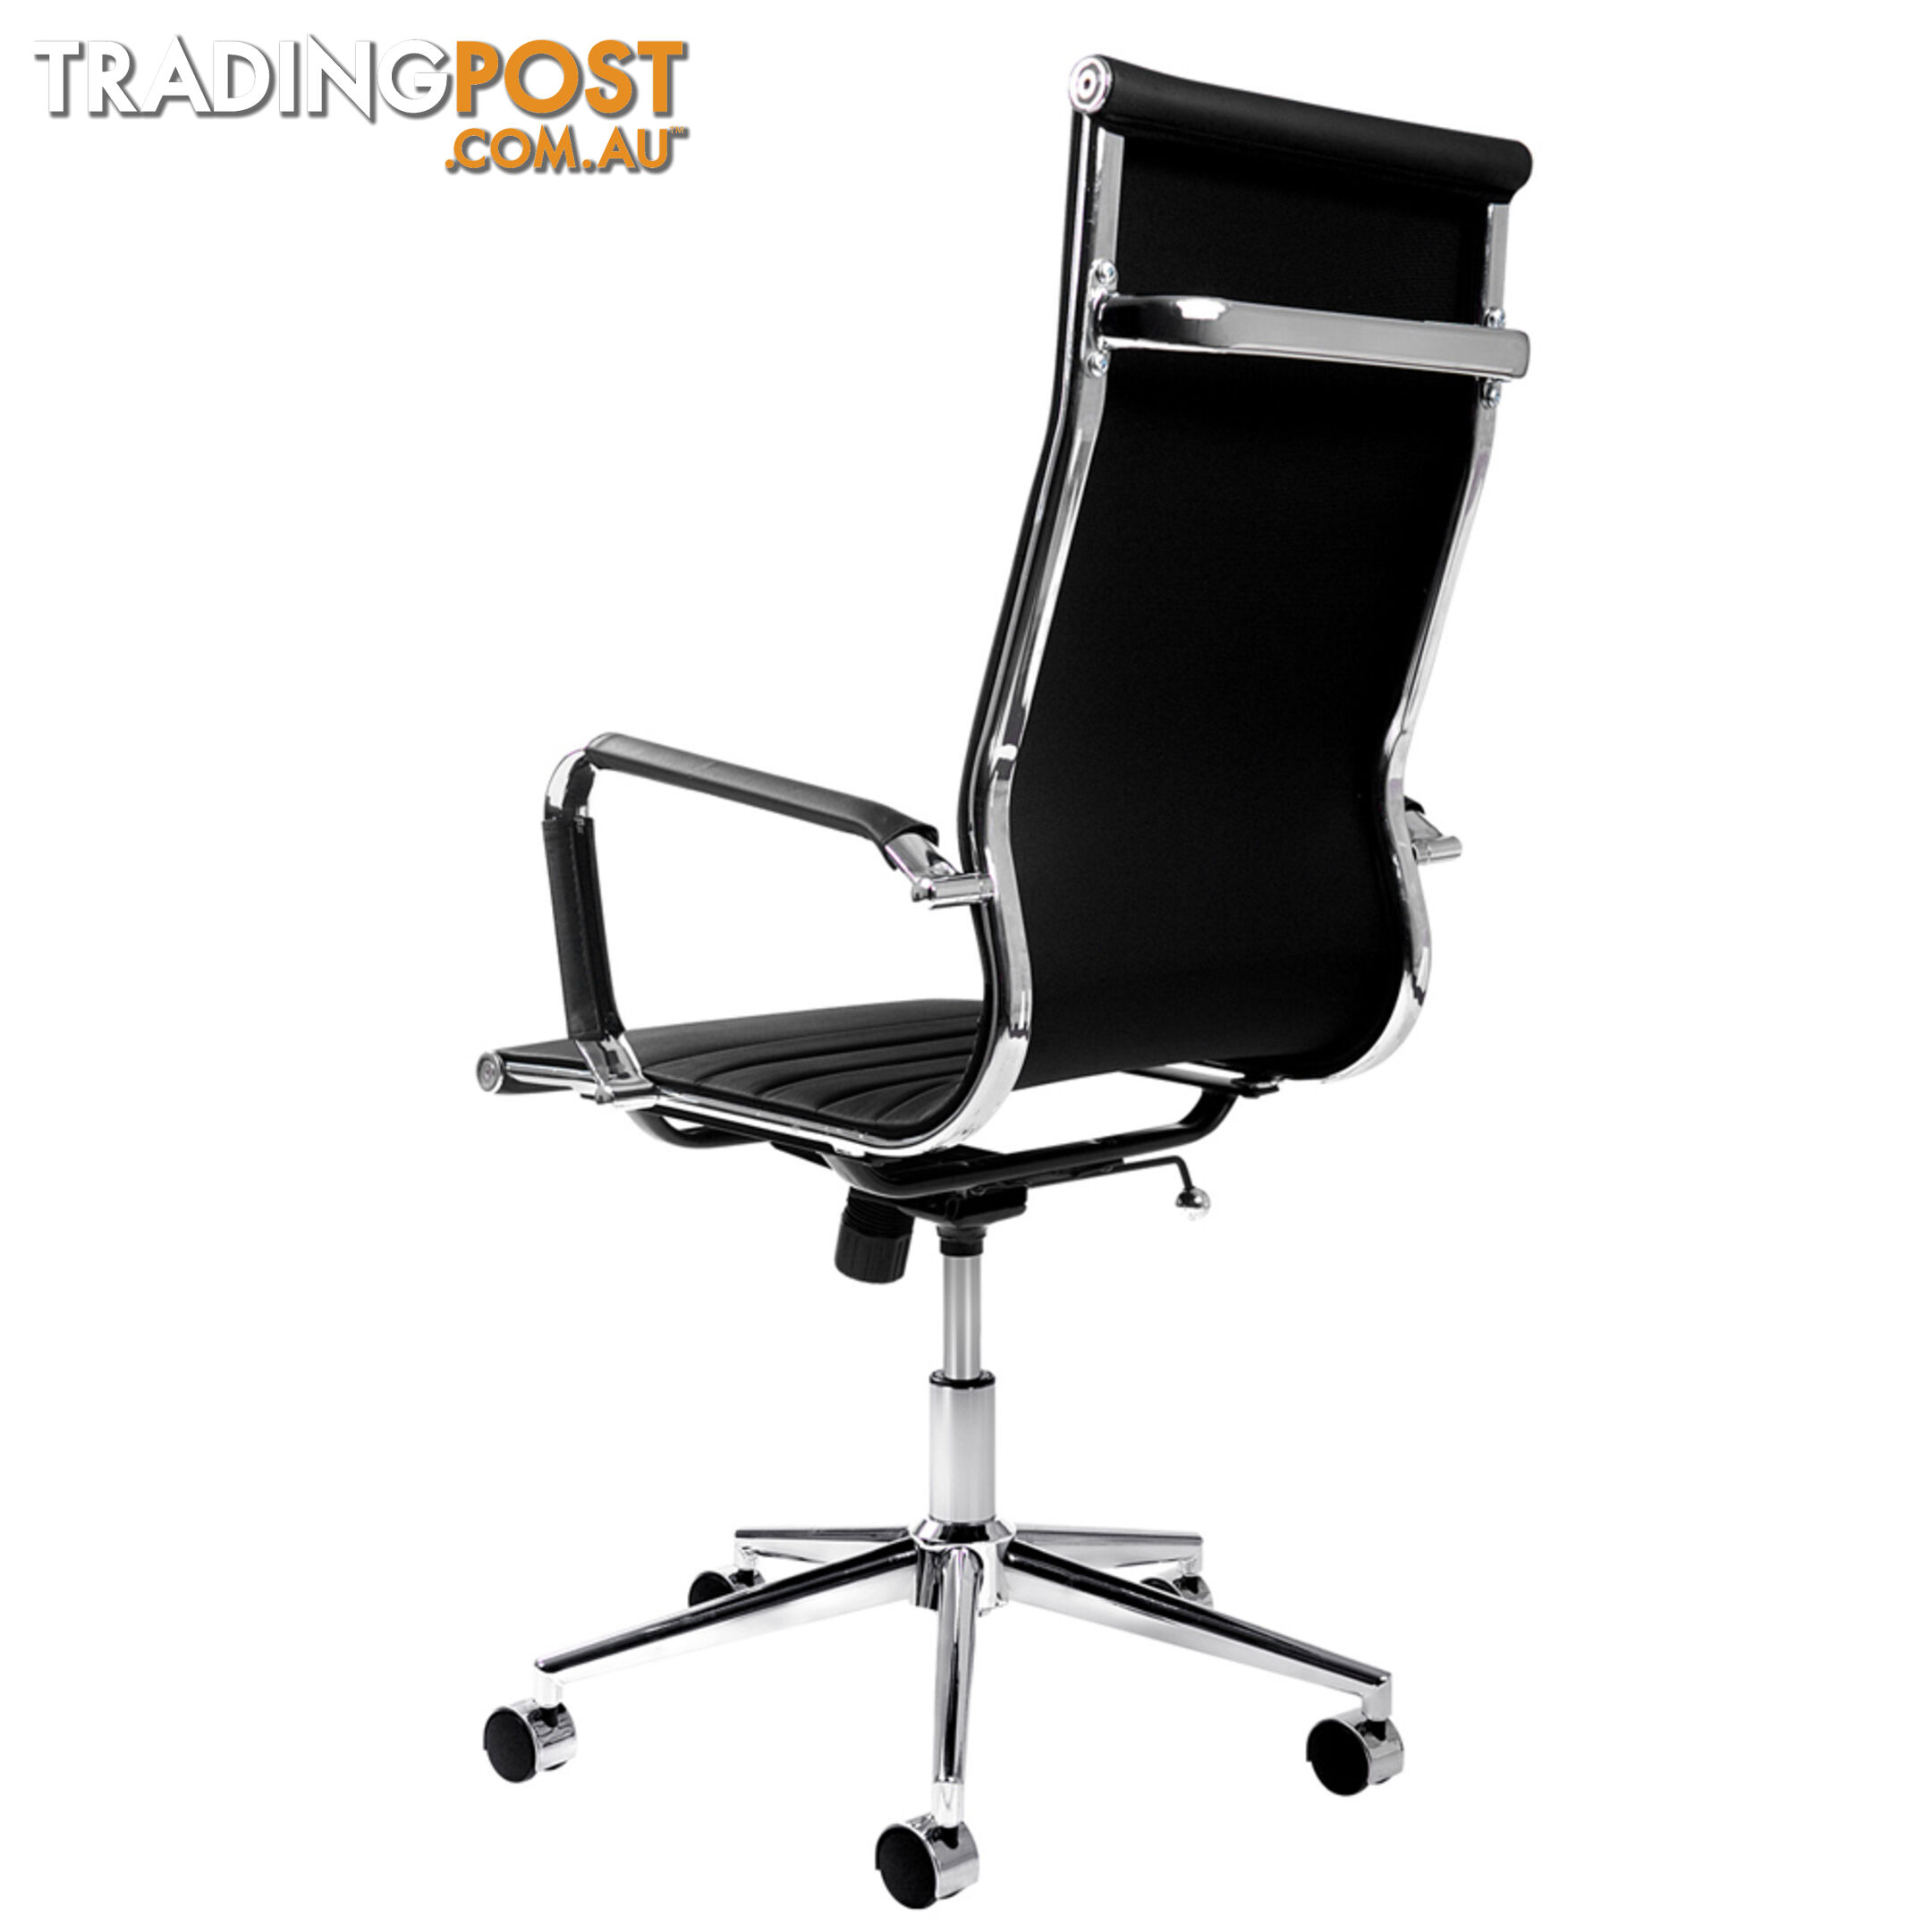 Eames Replica PU Leather High Back Executive Computer Office Chair Black